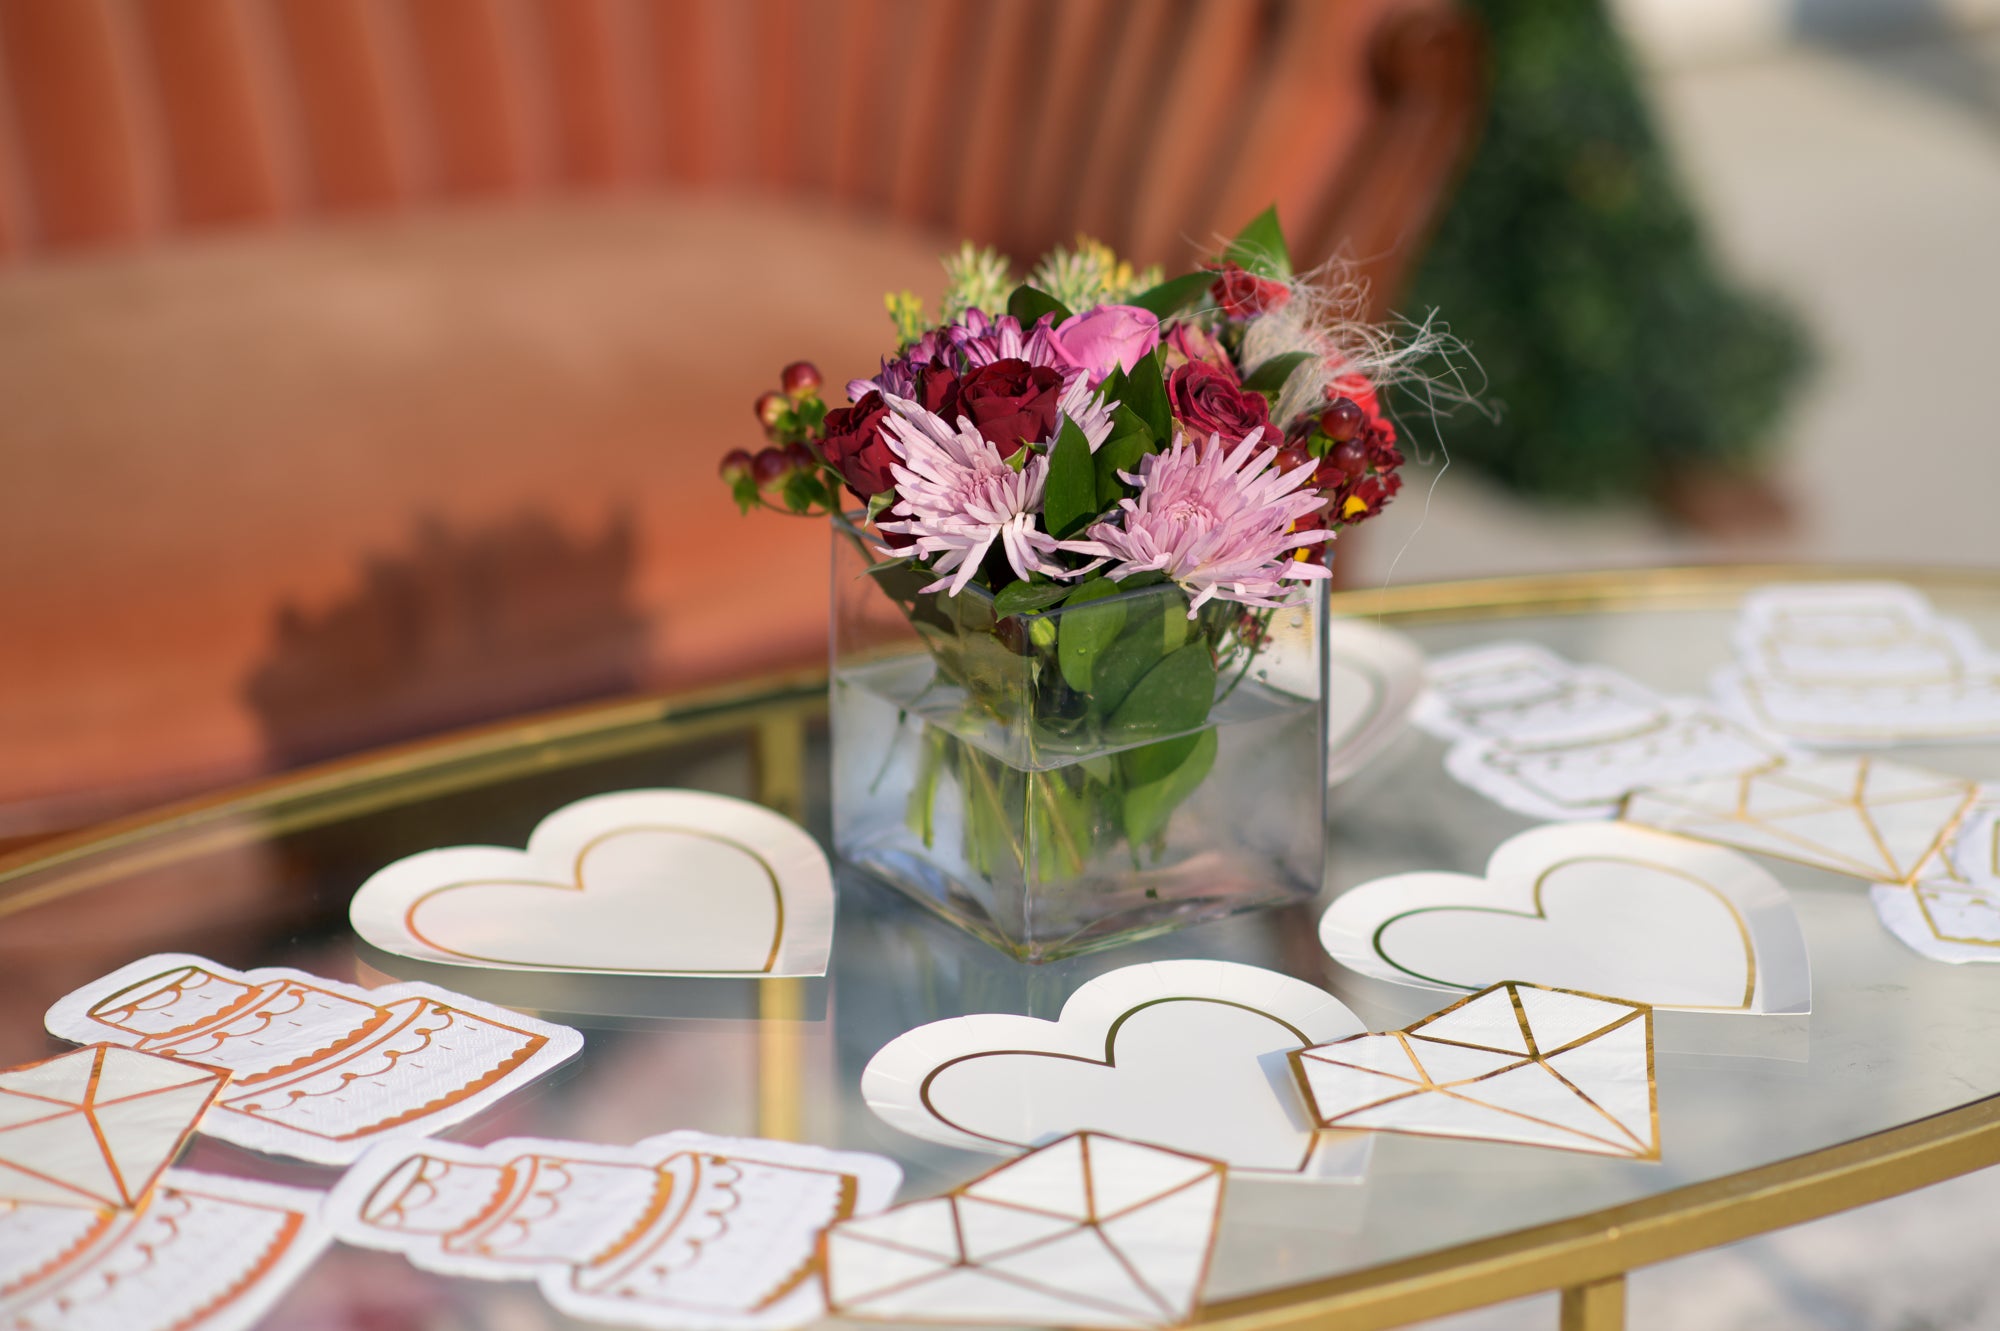 Bride to Be Heart Plates